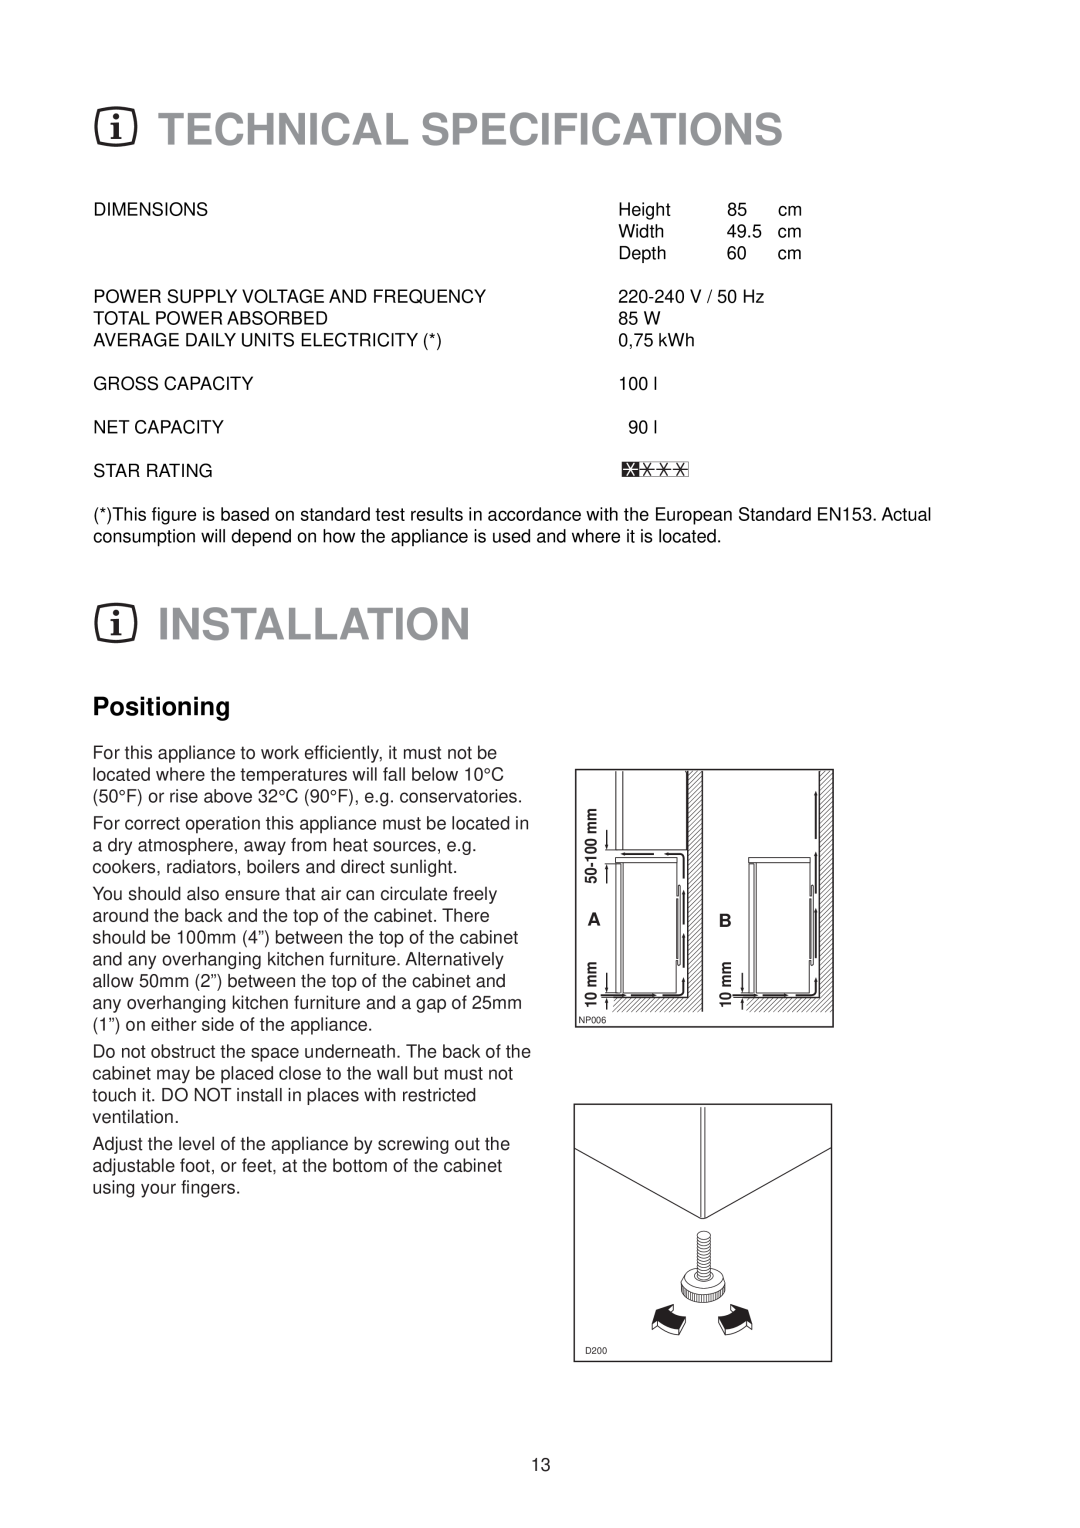 Zanussi ZF 24 W manual Technical Specifications, Installation, Positioning 